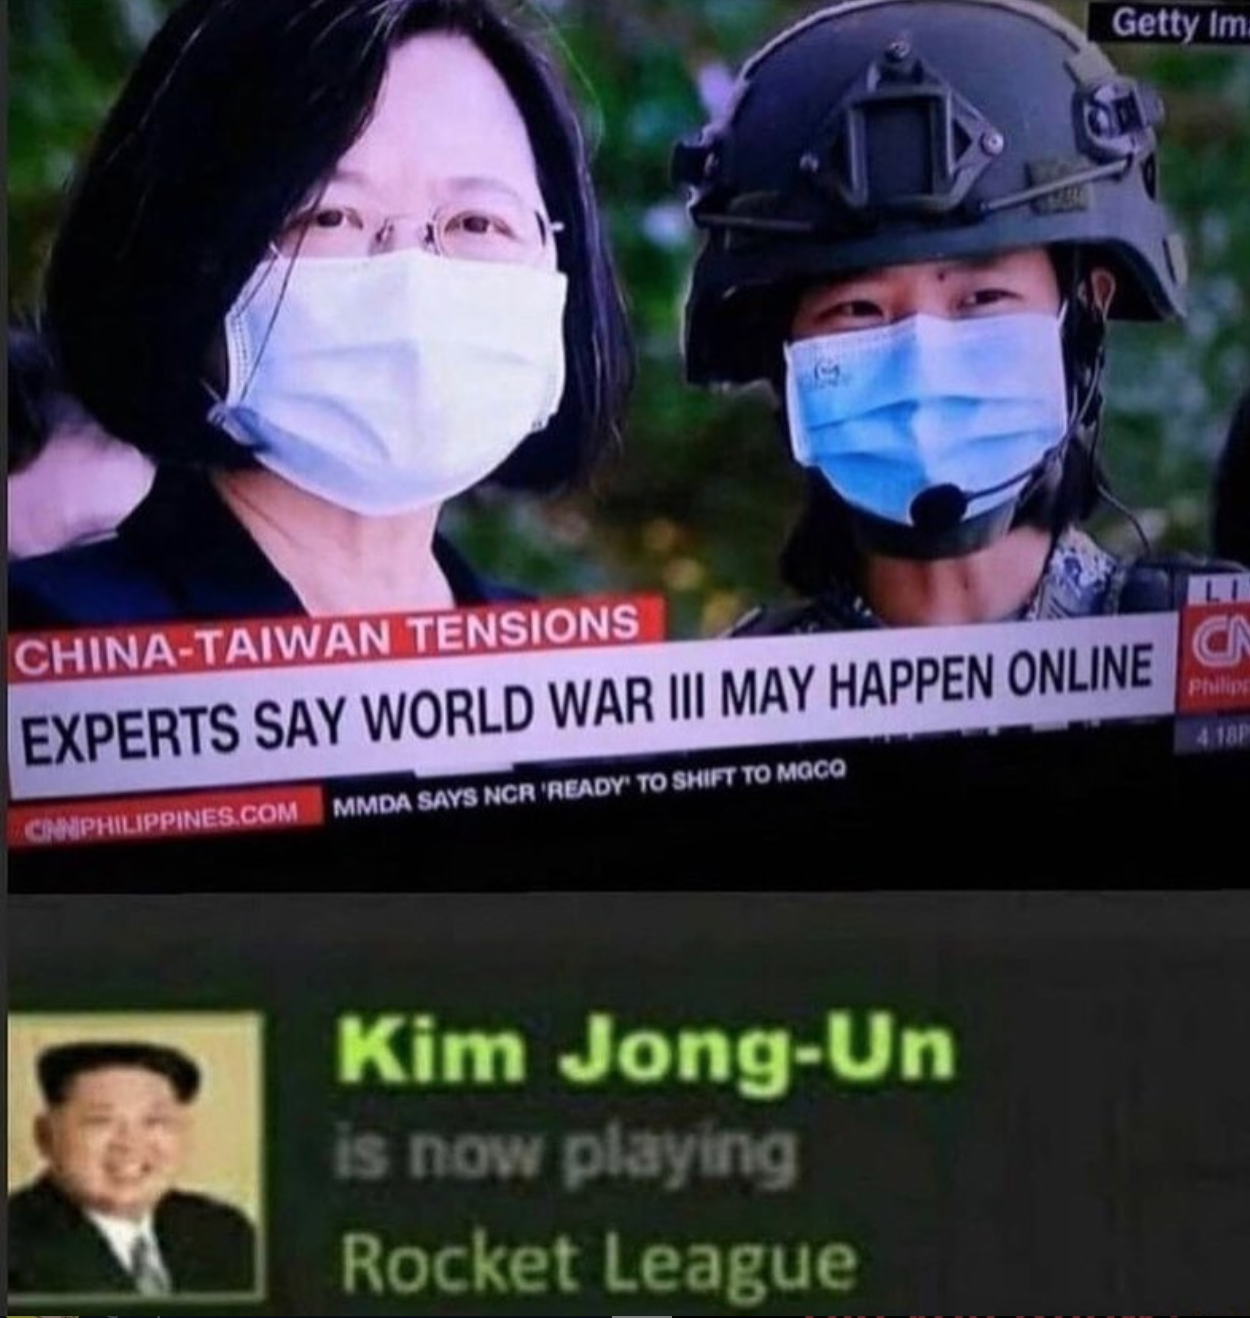 funny gaming memes - kim jong un rocket league - Getty Imi ChinaTaiwan Tensions Experts Say World War Iii May Happen Online Mmda Says Ncr Ready To Shift To Moco Cina Philippines.Com Kim JongUn is now playing Rocket League